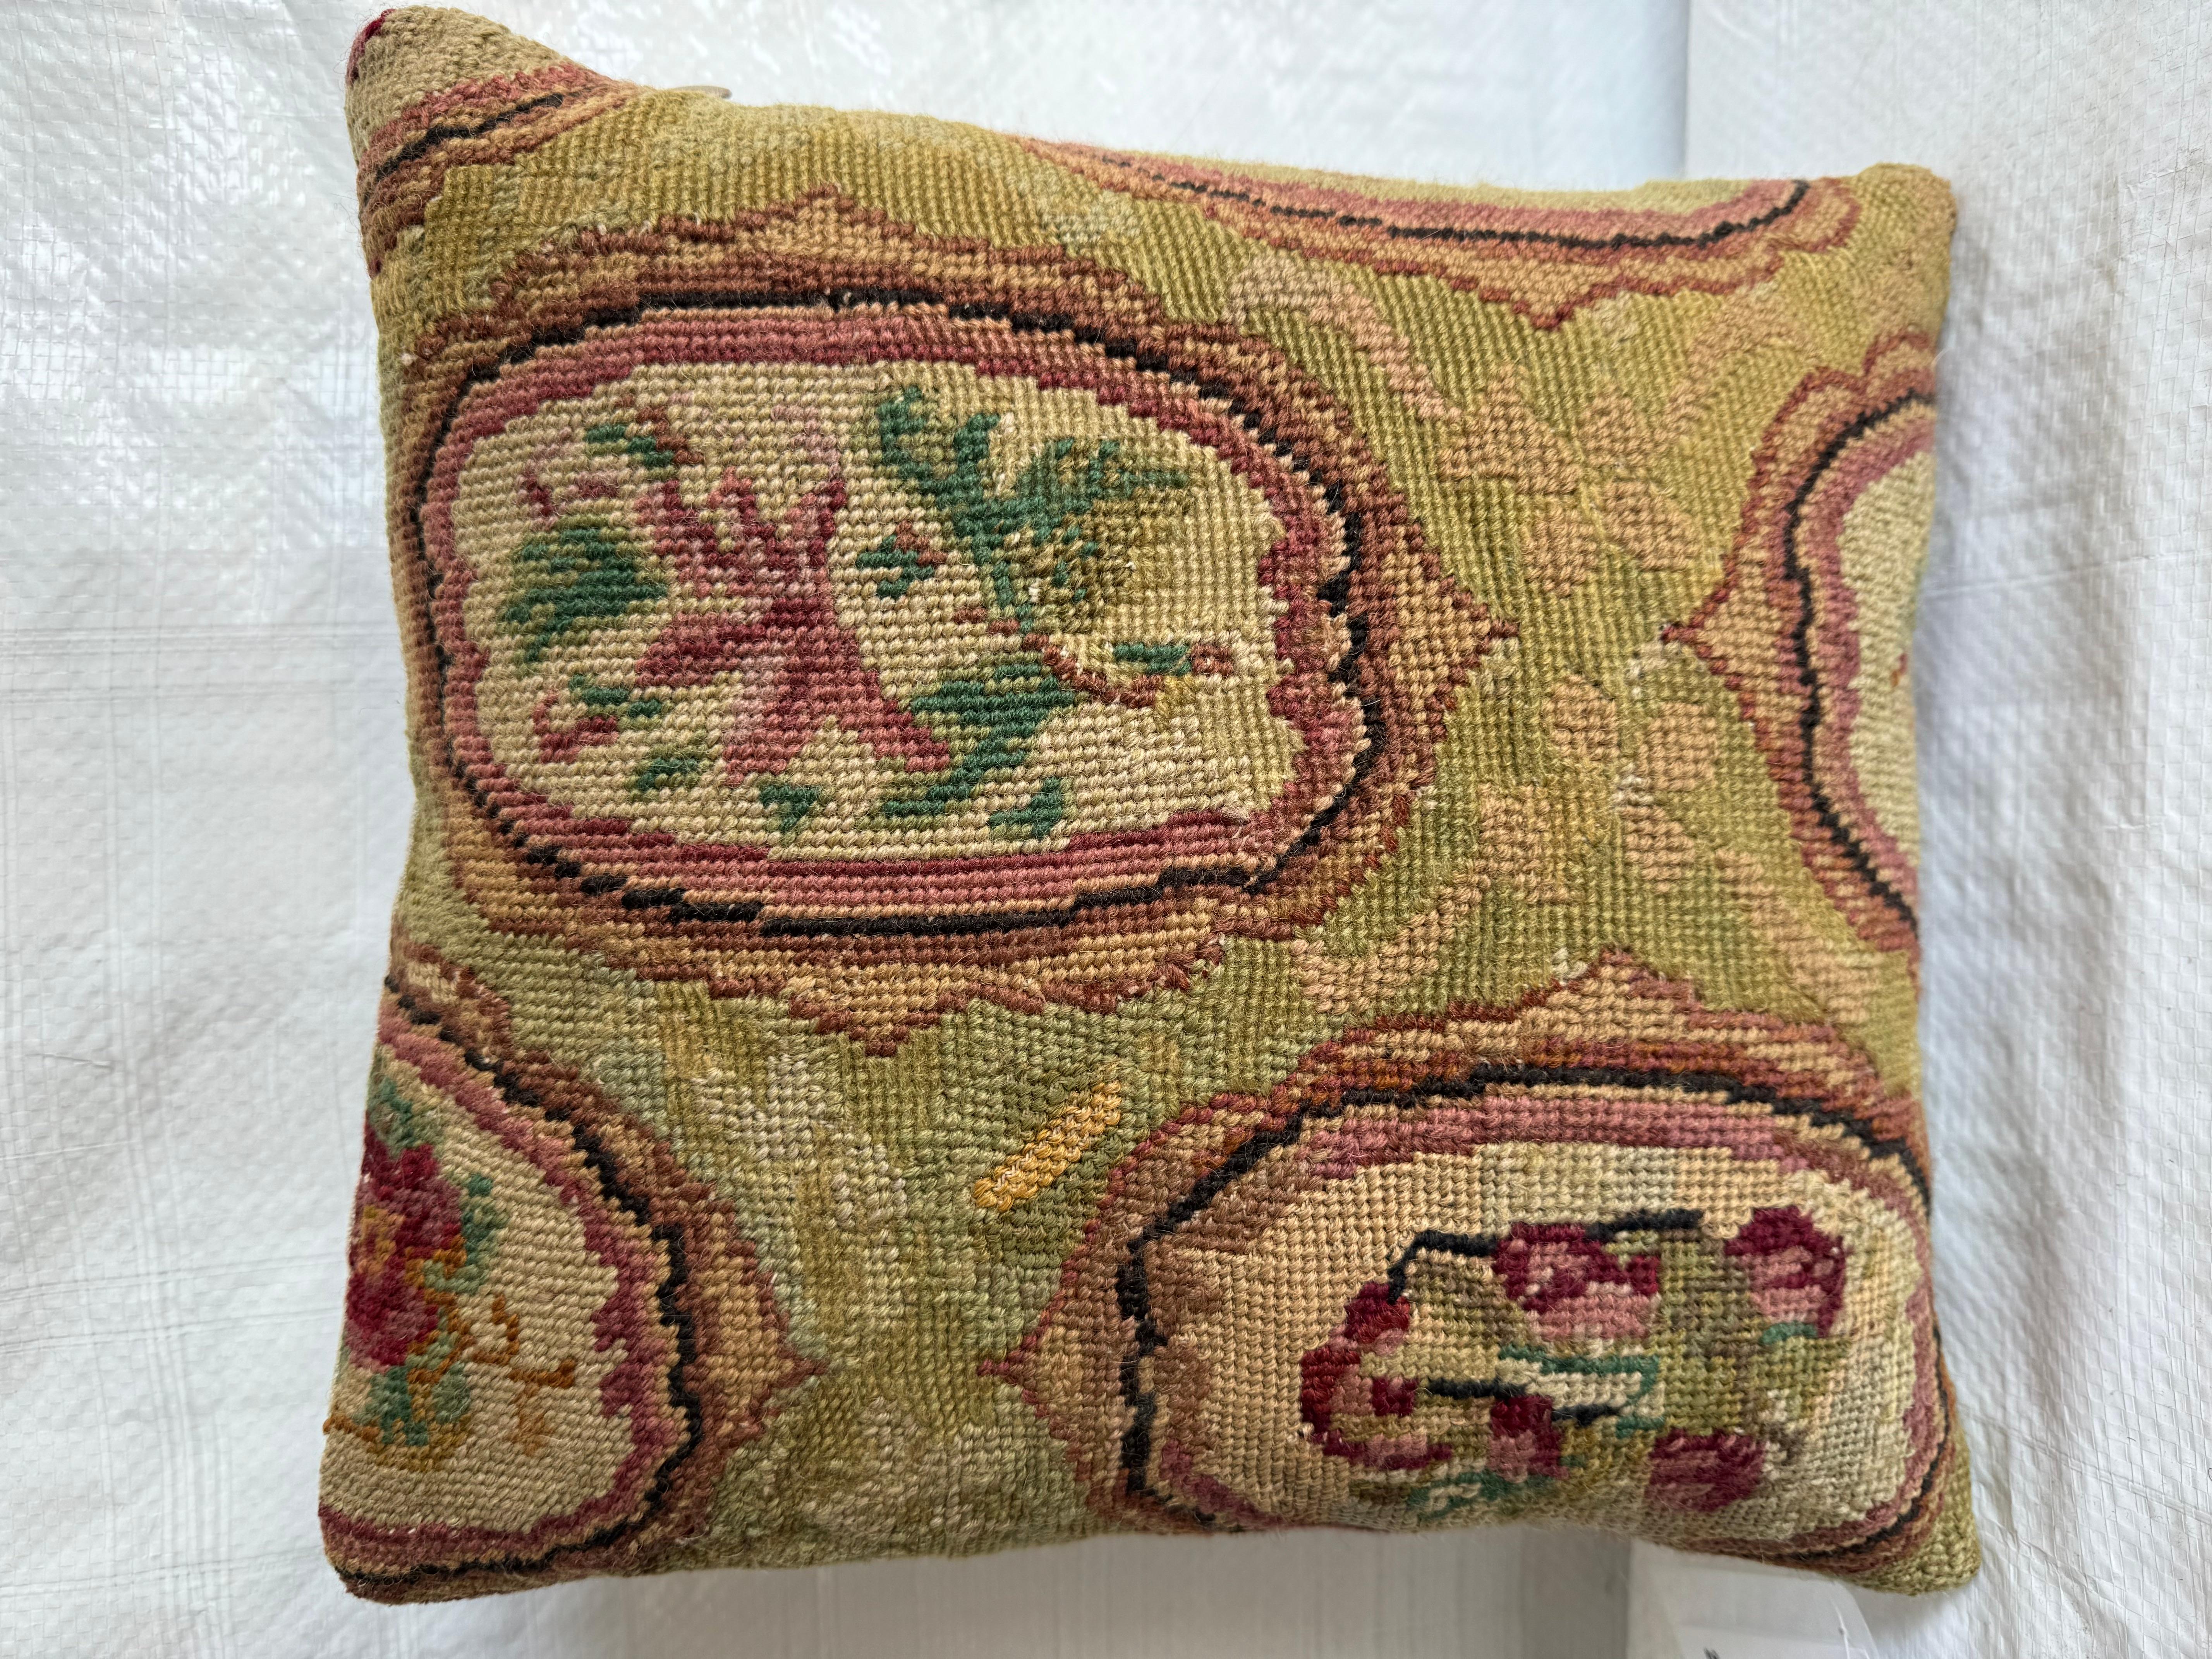 Experience the timeless allure of the Victorian era with our meticulously crafted 1850 English Needlework Pillow. Measuring 12